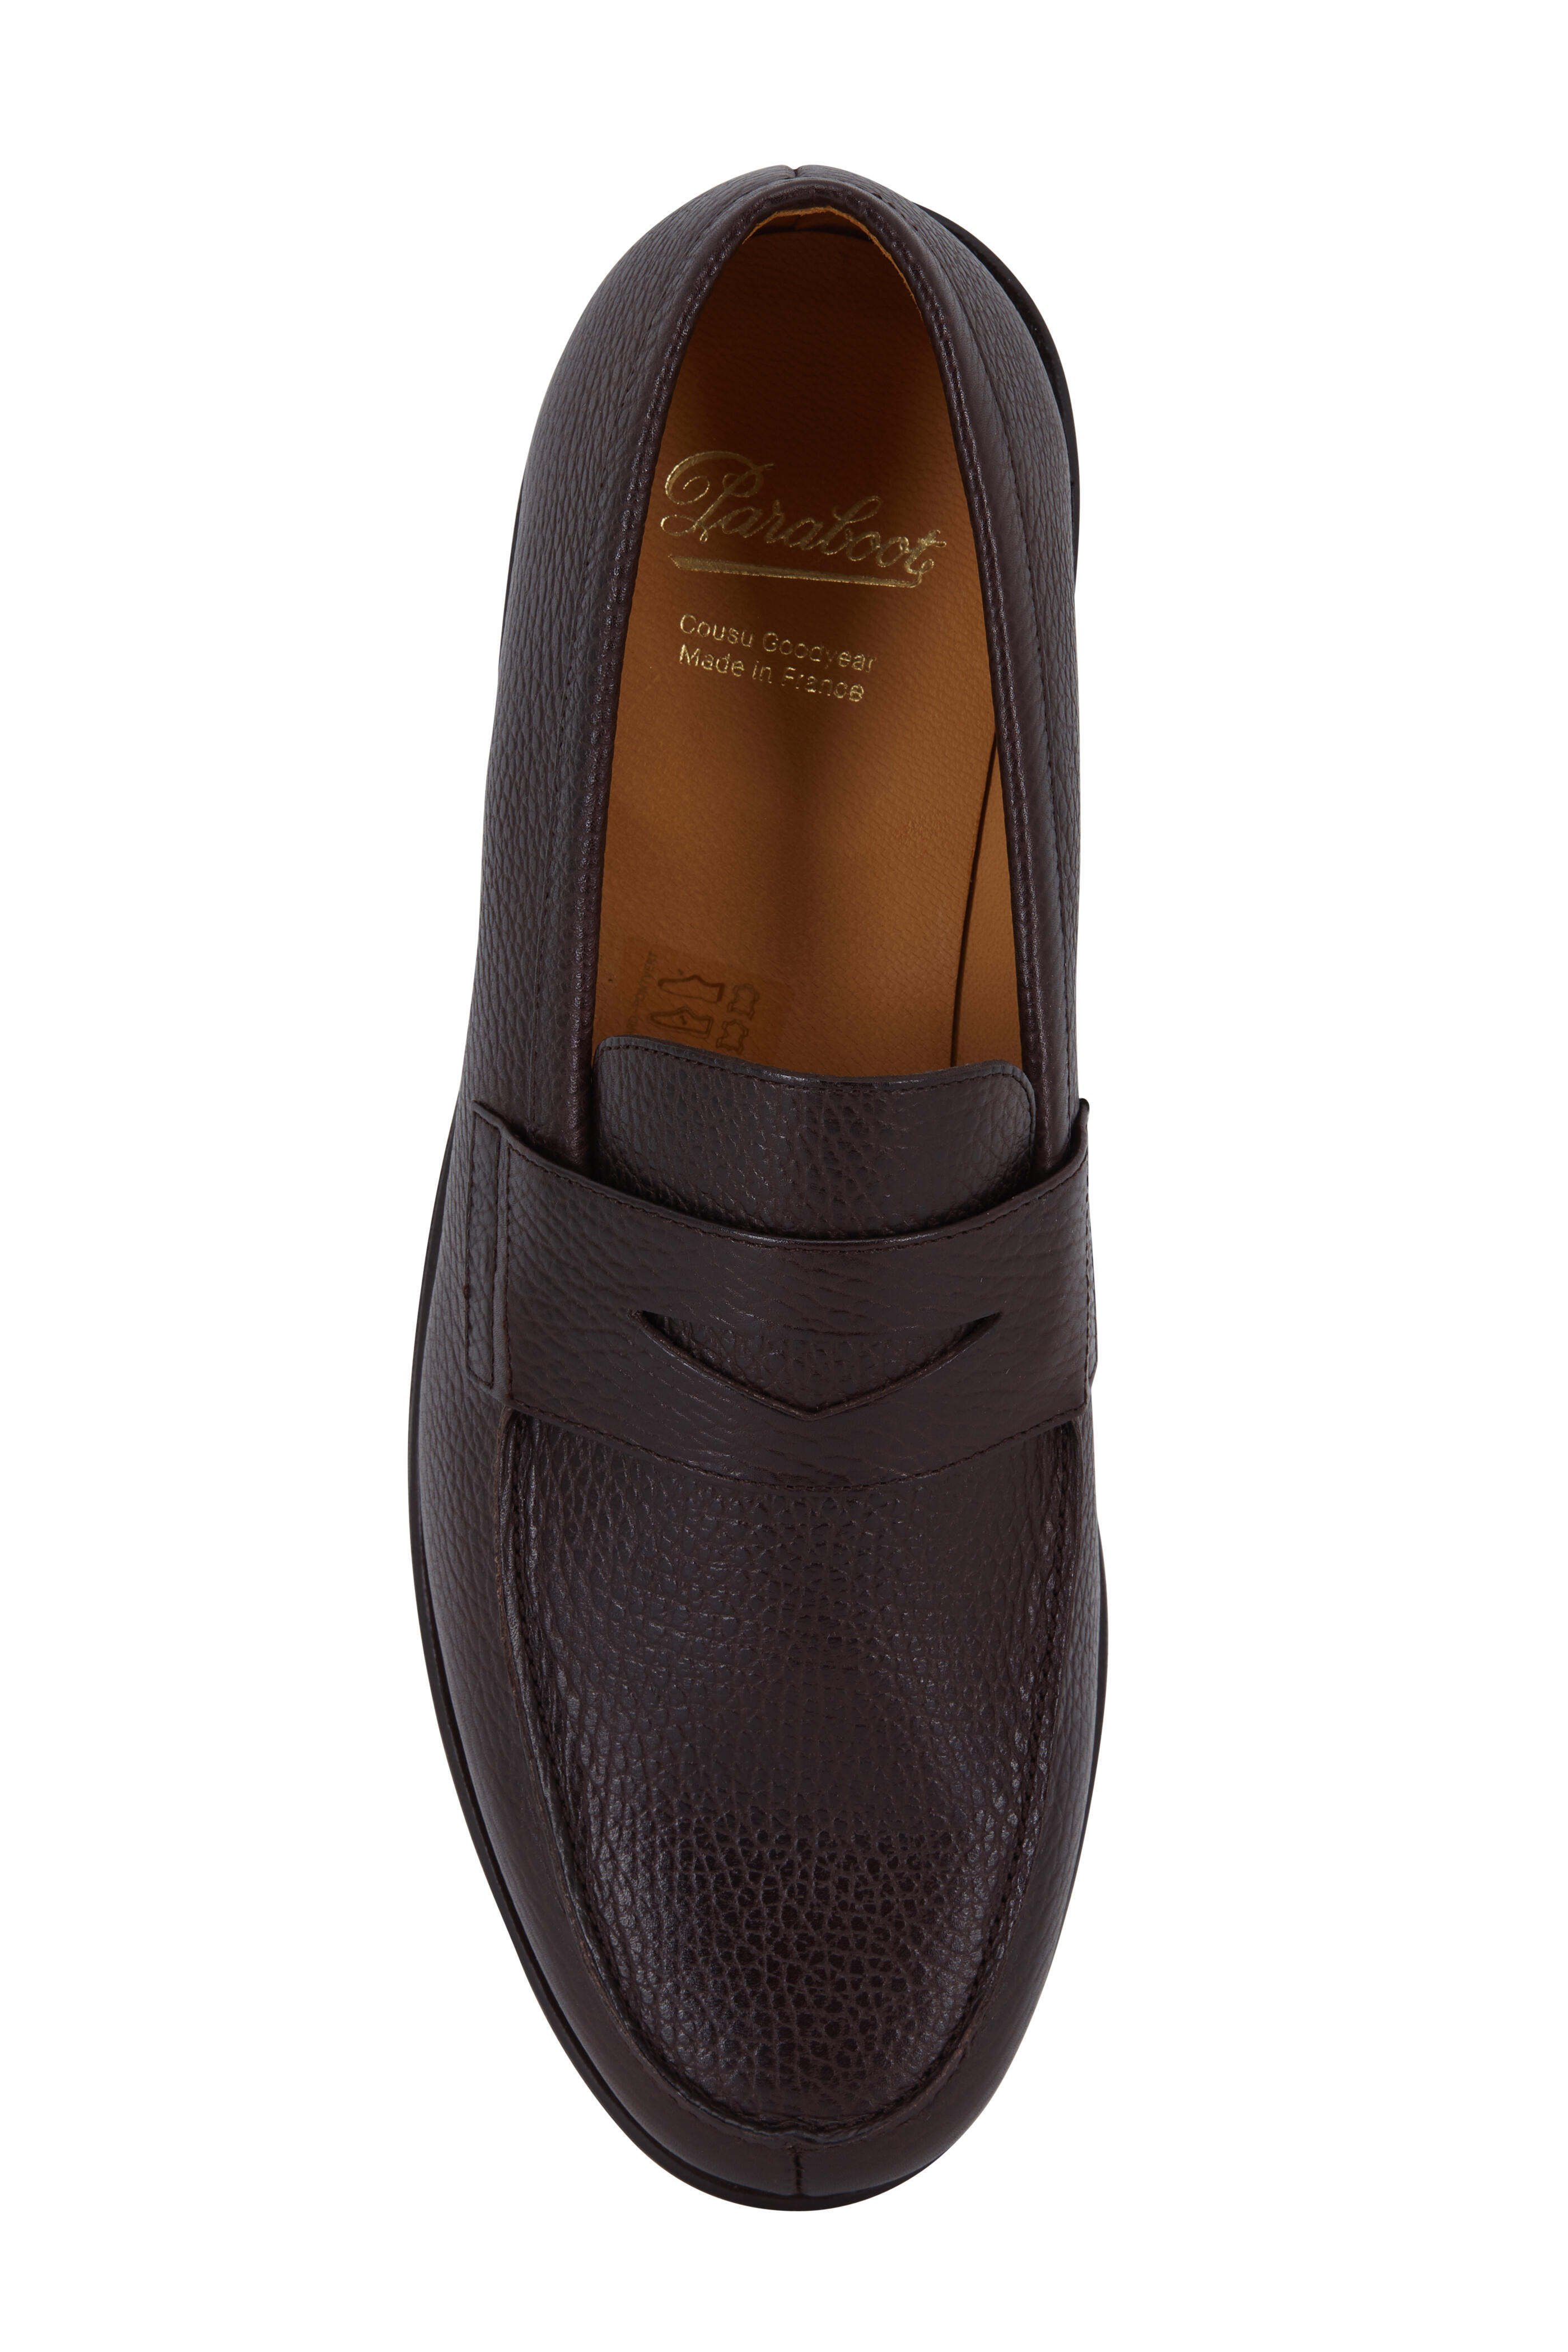 Paraboot - Adonis Marron Galaxy Fine Leather Penny Loafer